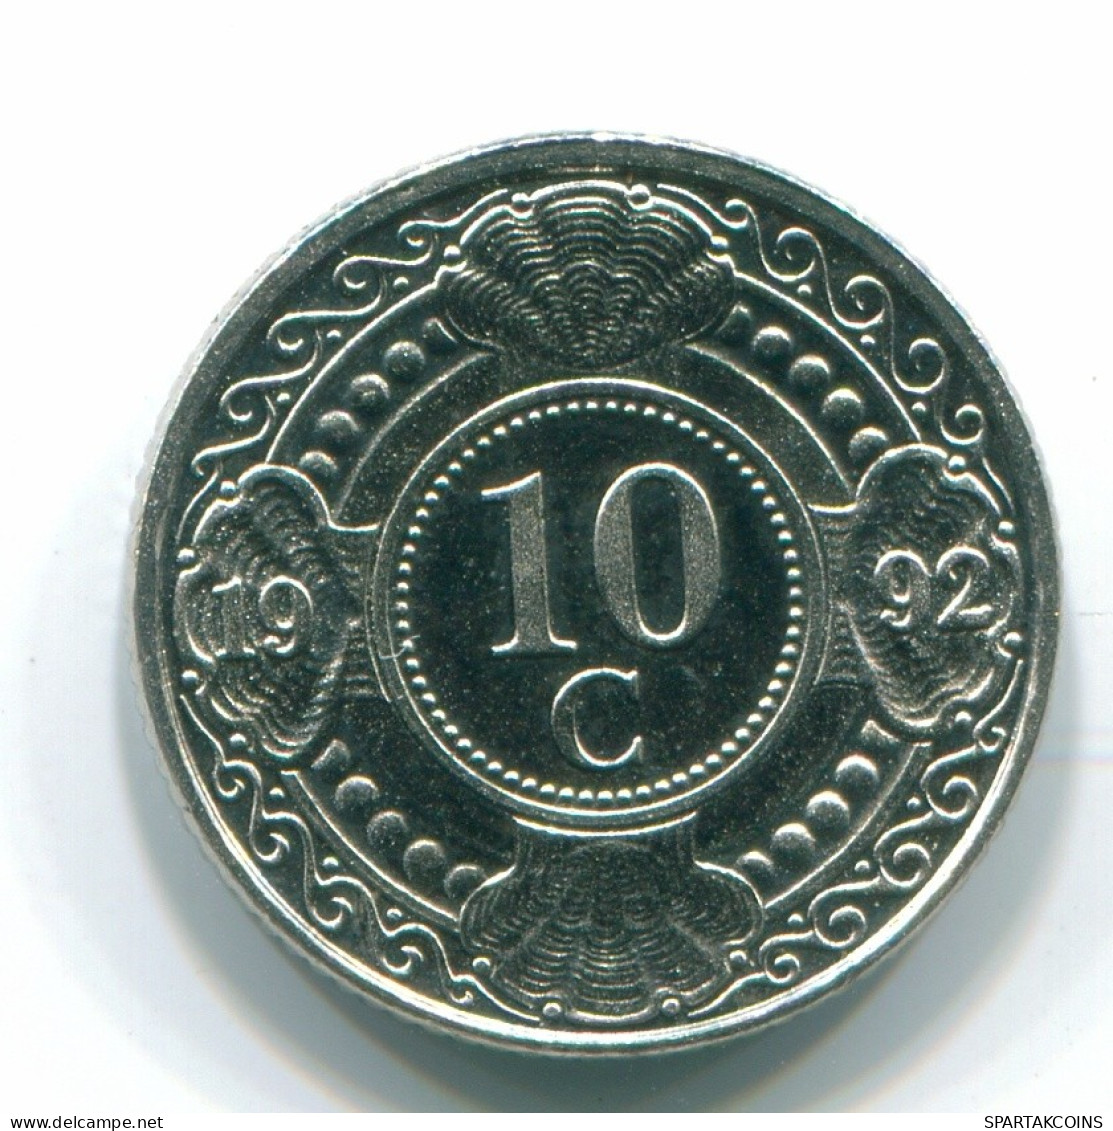 10 CENTS 1992 NETHERLANDS ANTILLES Nickel Colonial Coin #S11356.U.A - Antille Olandesi